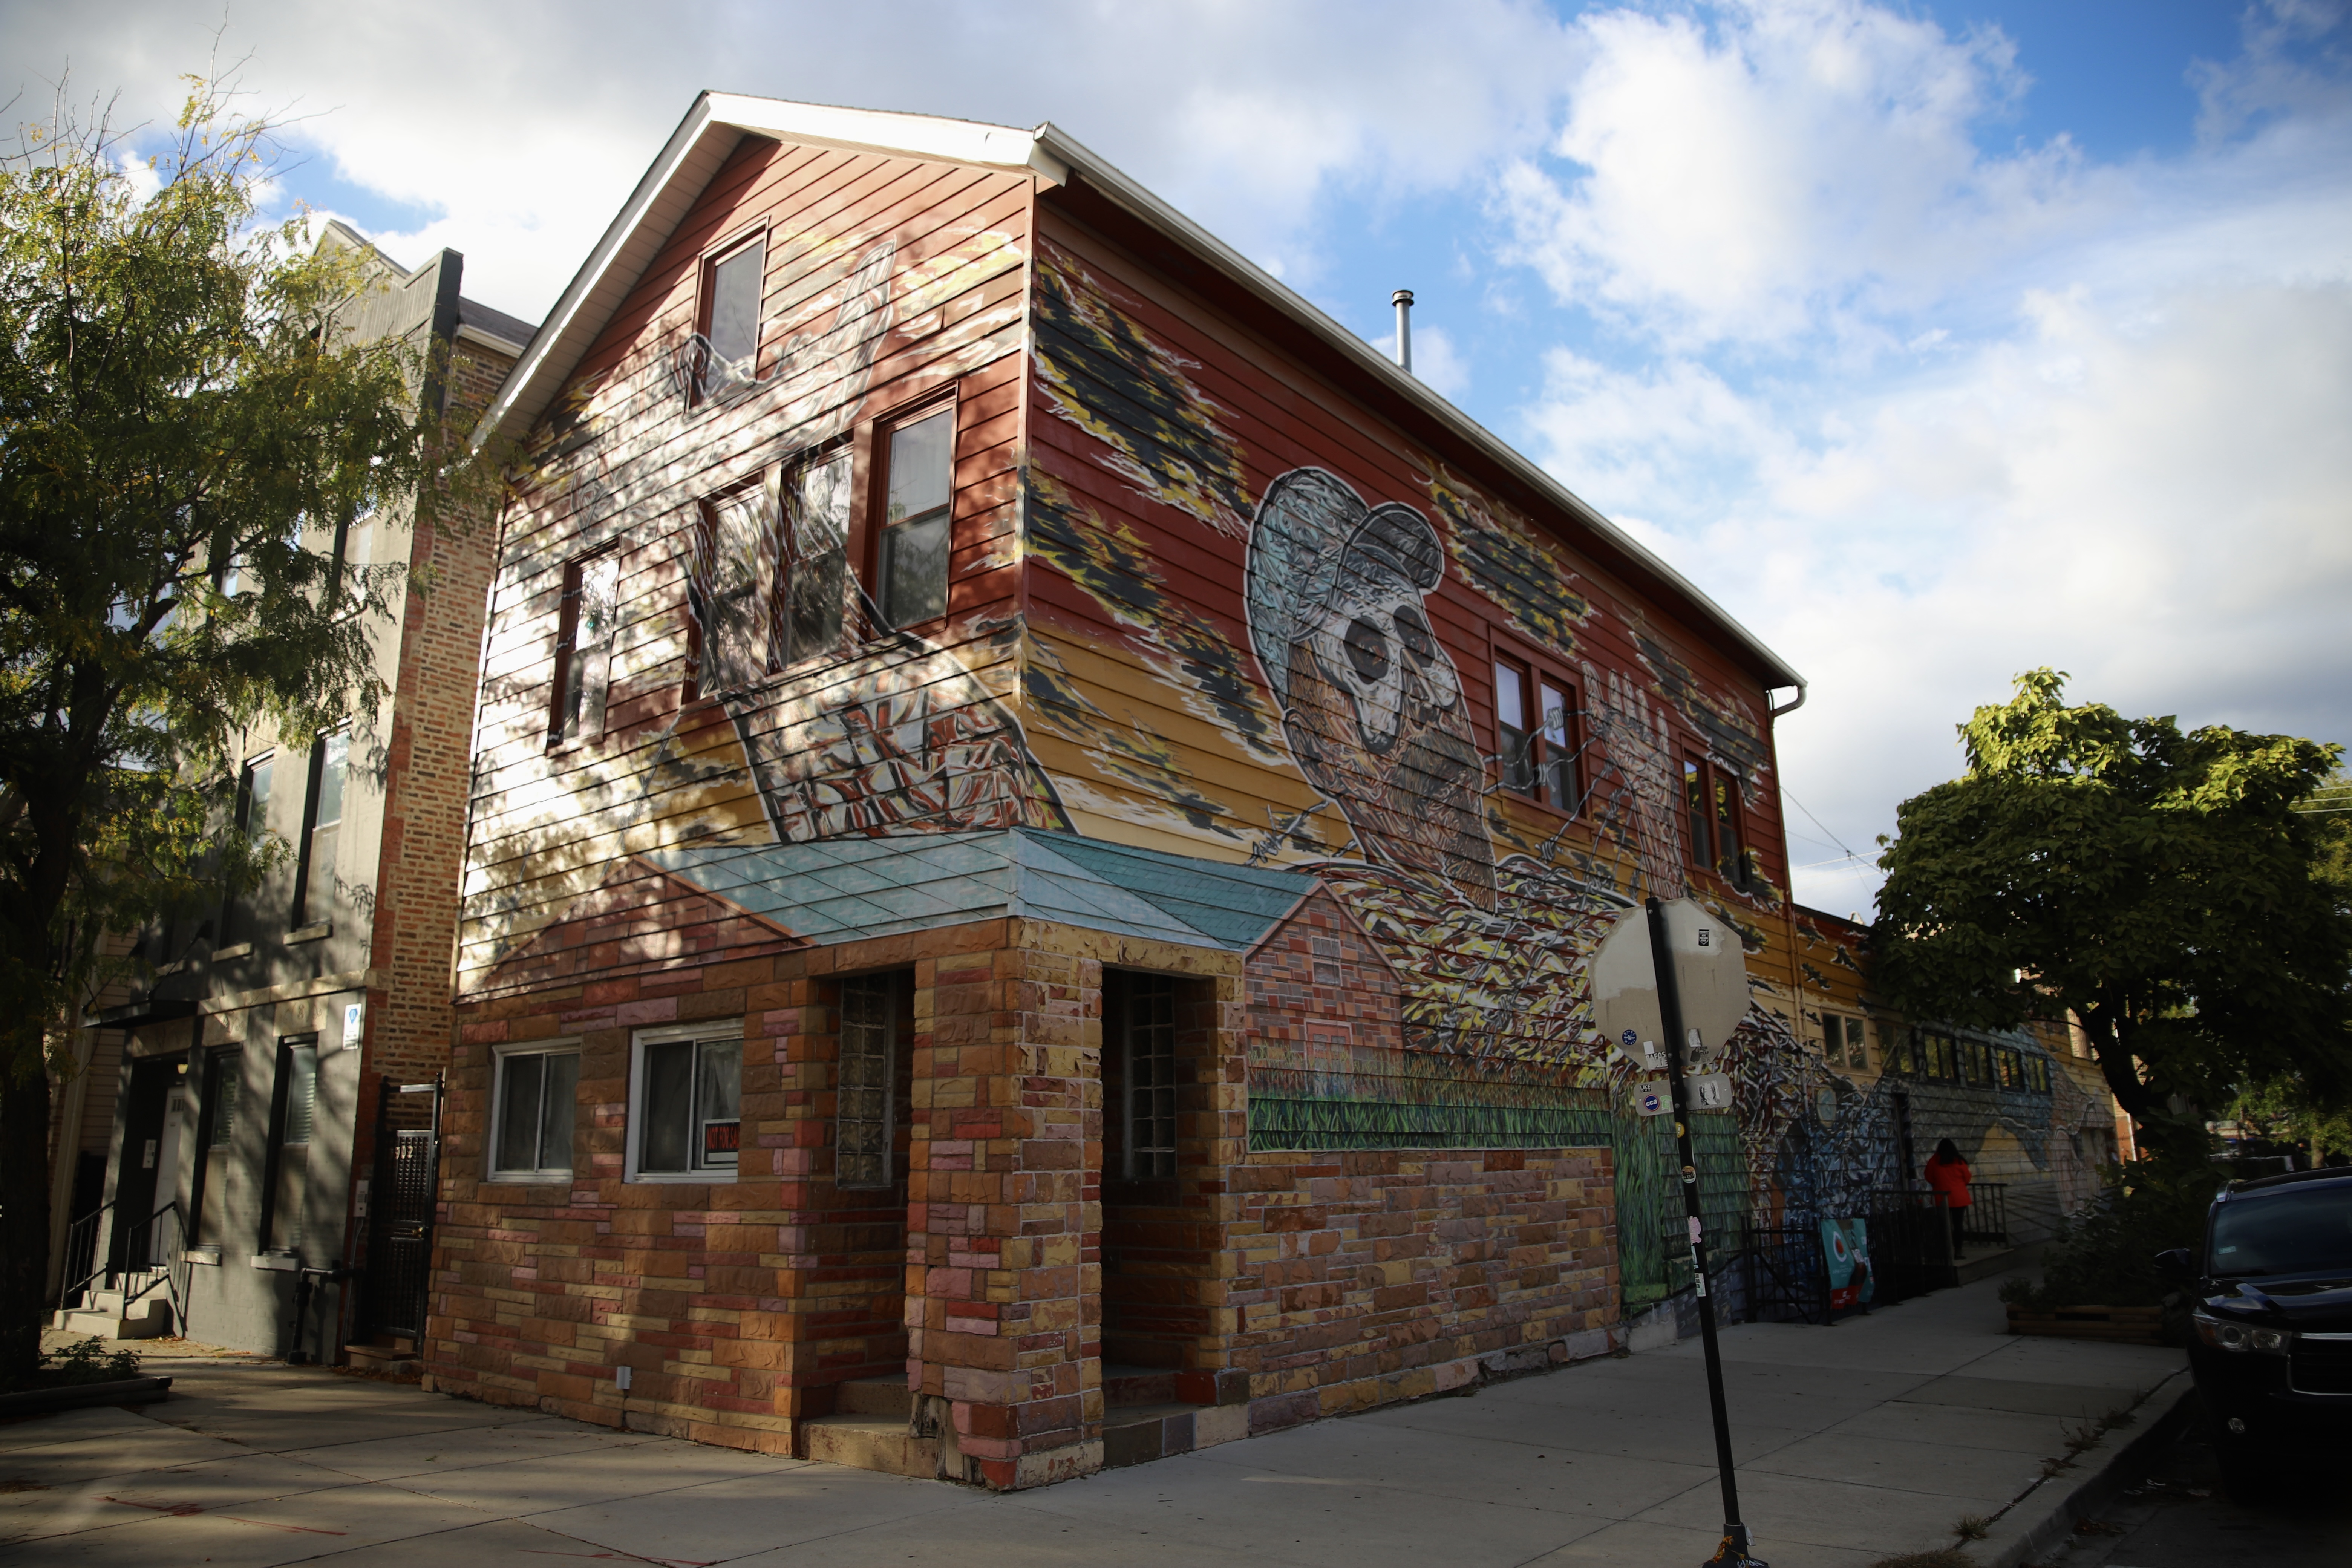 Exterior of Duarte's studio with a mural painted by the artist himself | photo by Jana Simovic